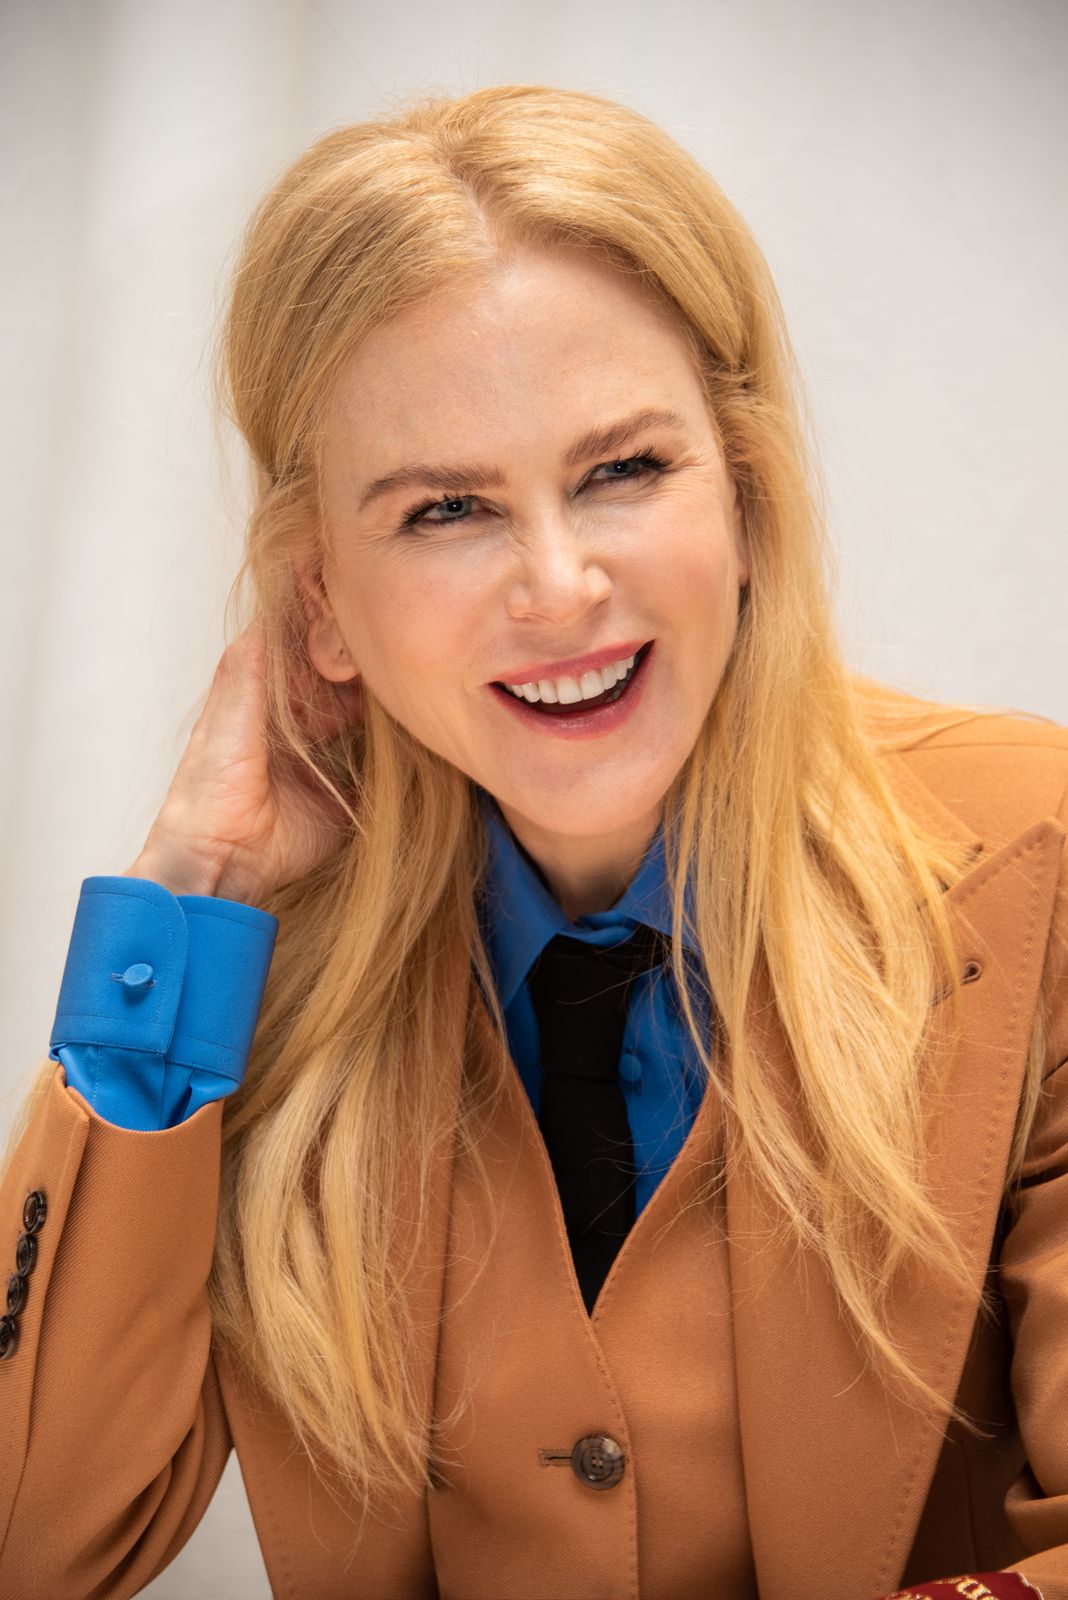 Nicole Kidman at "The Undoing" Press Conference at the Four Seasons Hotel on March 09, 2020 | Getty Images